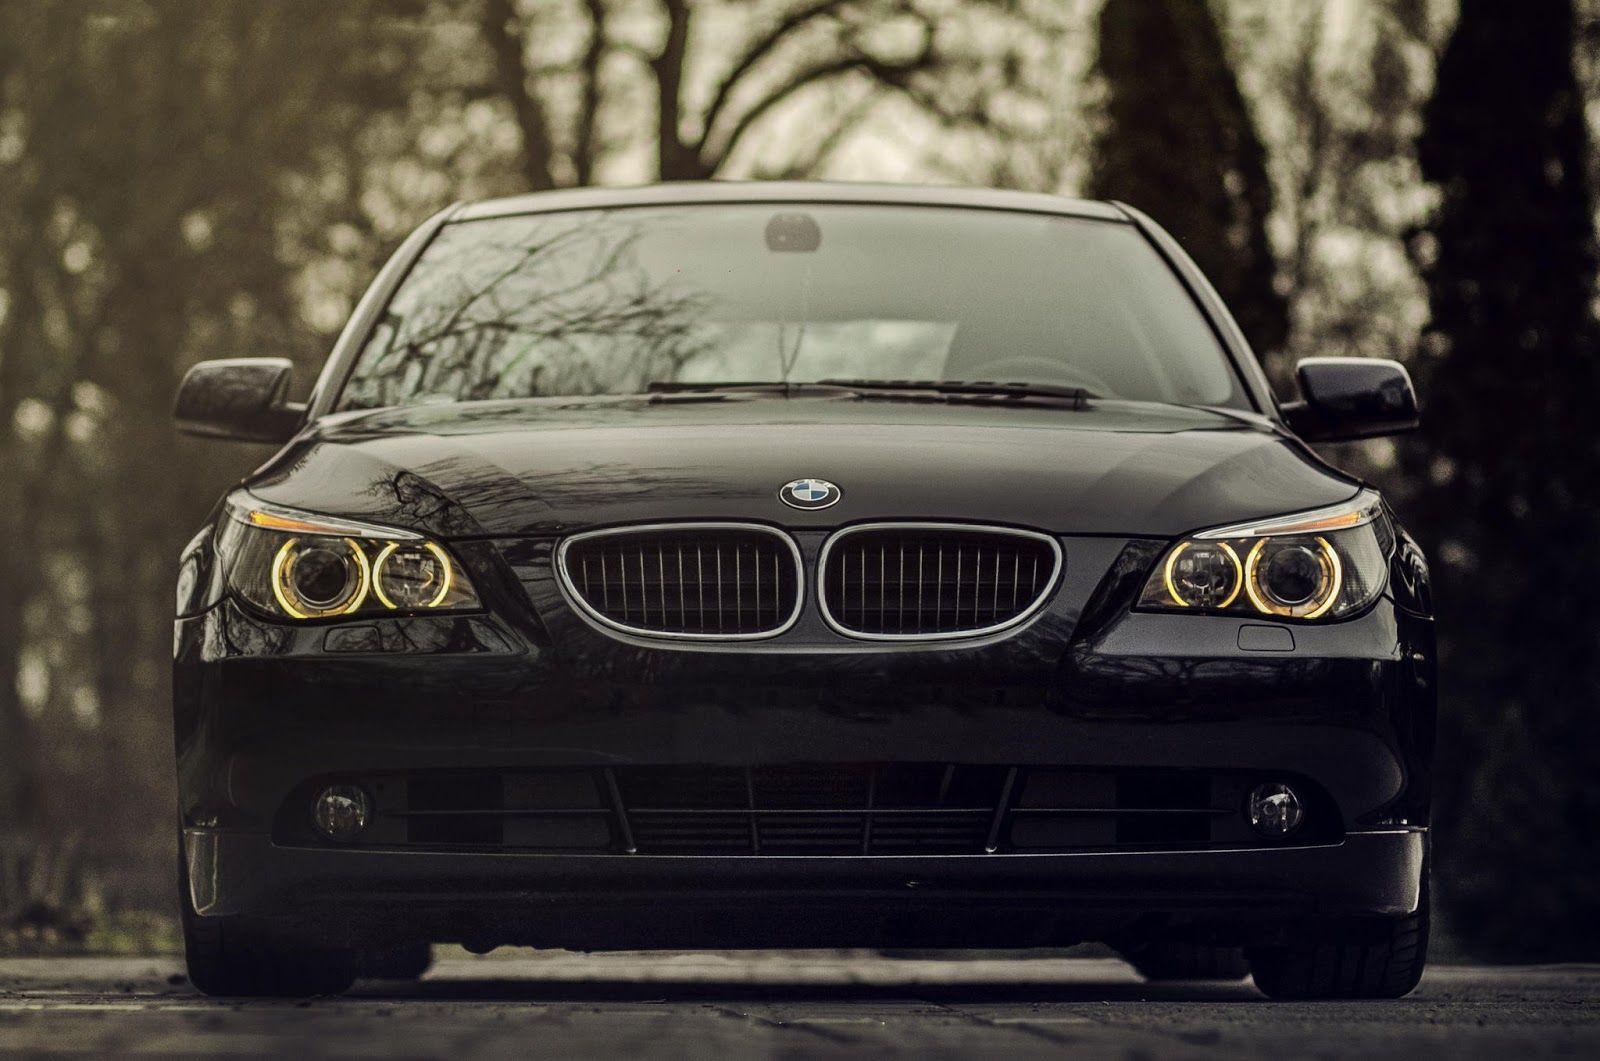 Featured image of post Bmw Car Hd Wallpapers 1080P Black - All 3d 60 favorites abstract animals anime art black cars city dark fantasy flowers food holidays love macro minimalism motorcycles music nature other smilies space sport bmw wallpapers, backgrounds, images 1920x1080— best bmw desktop wallpaper sort wallpapers by: